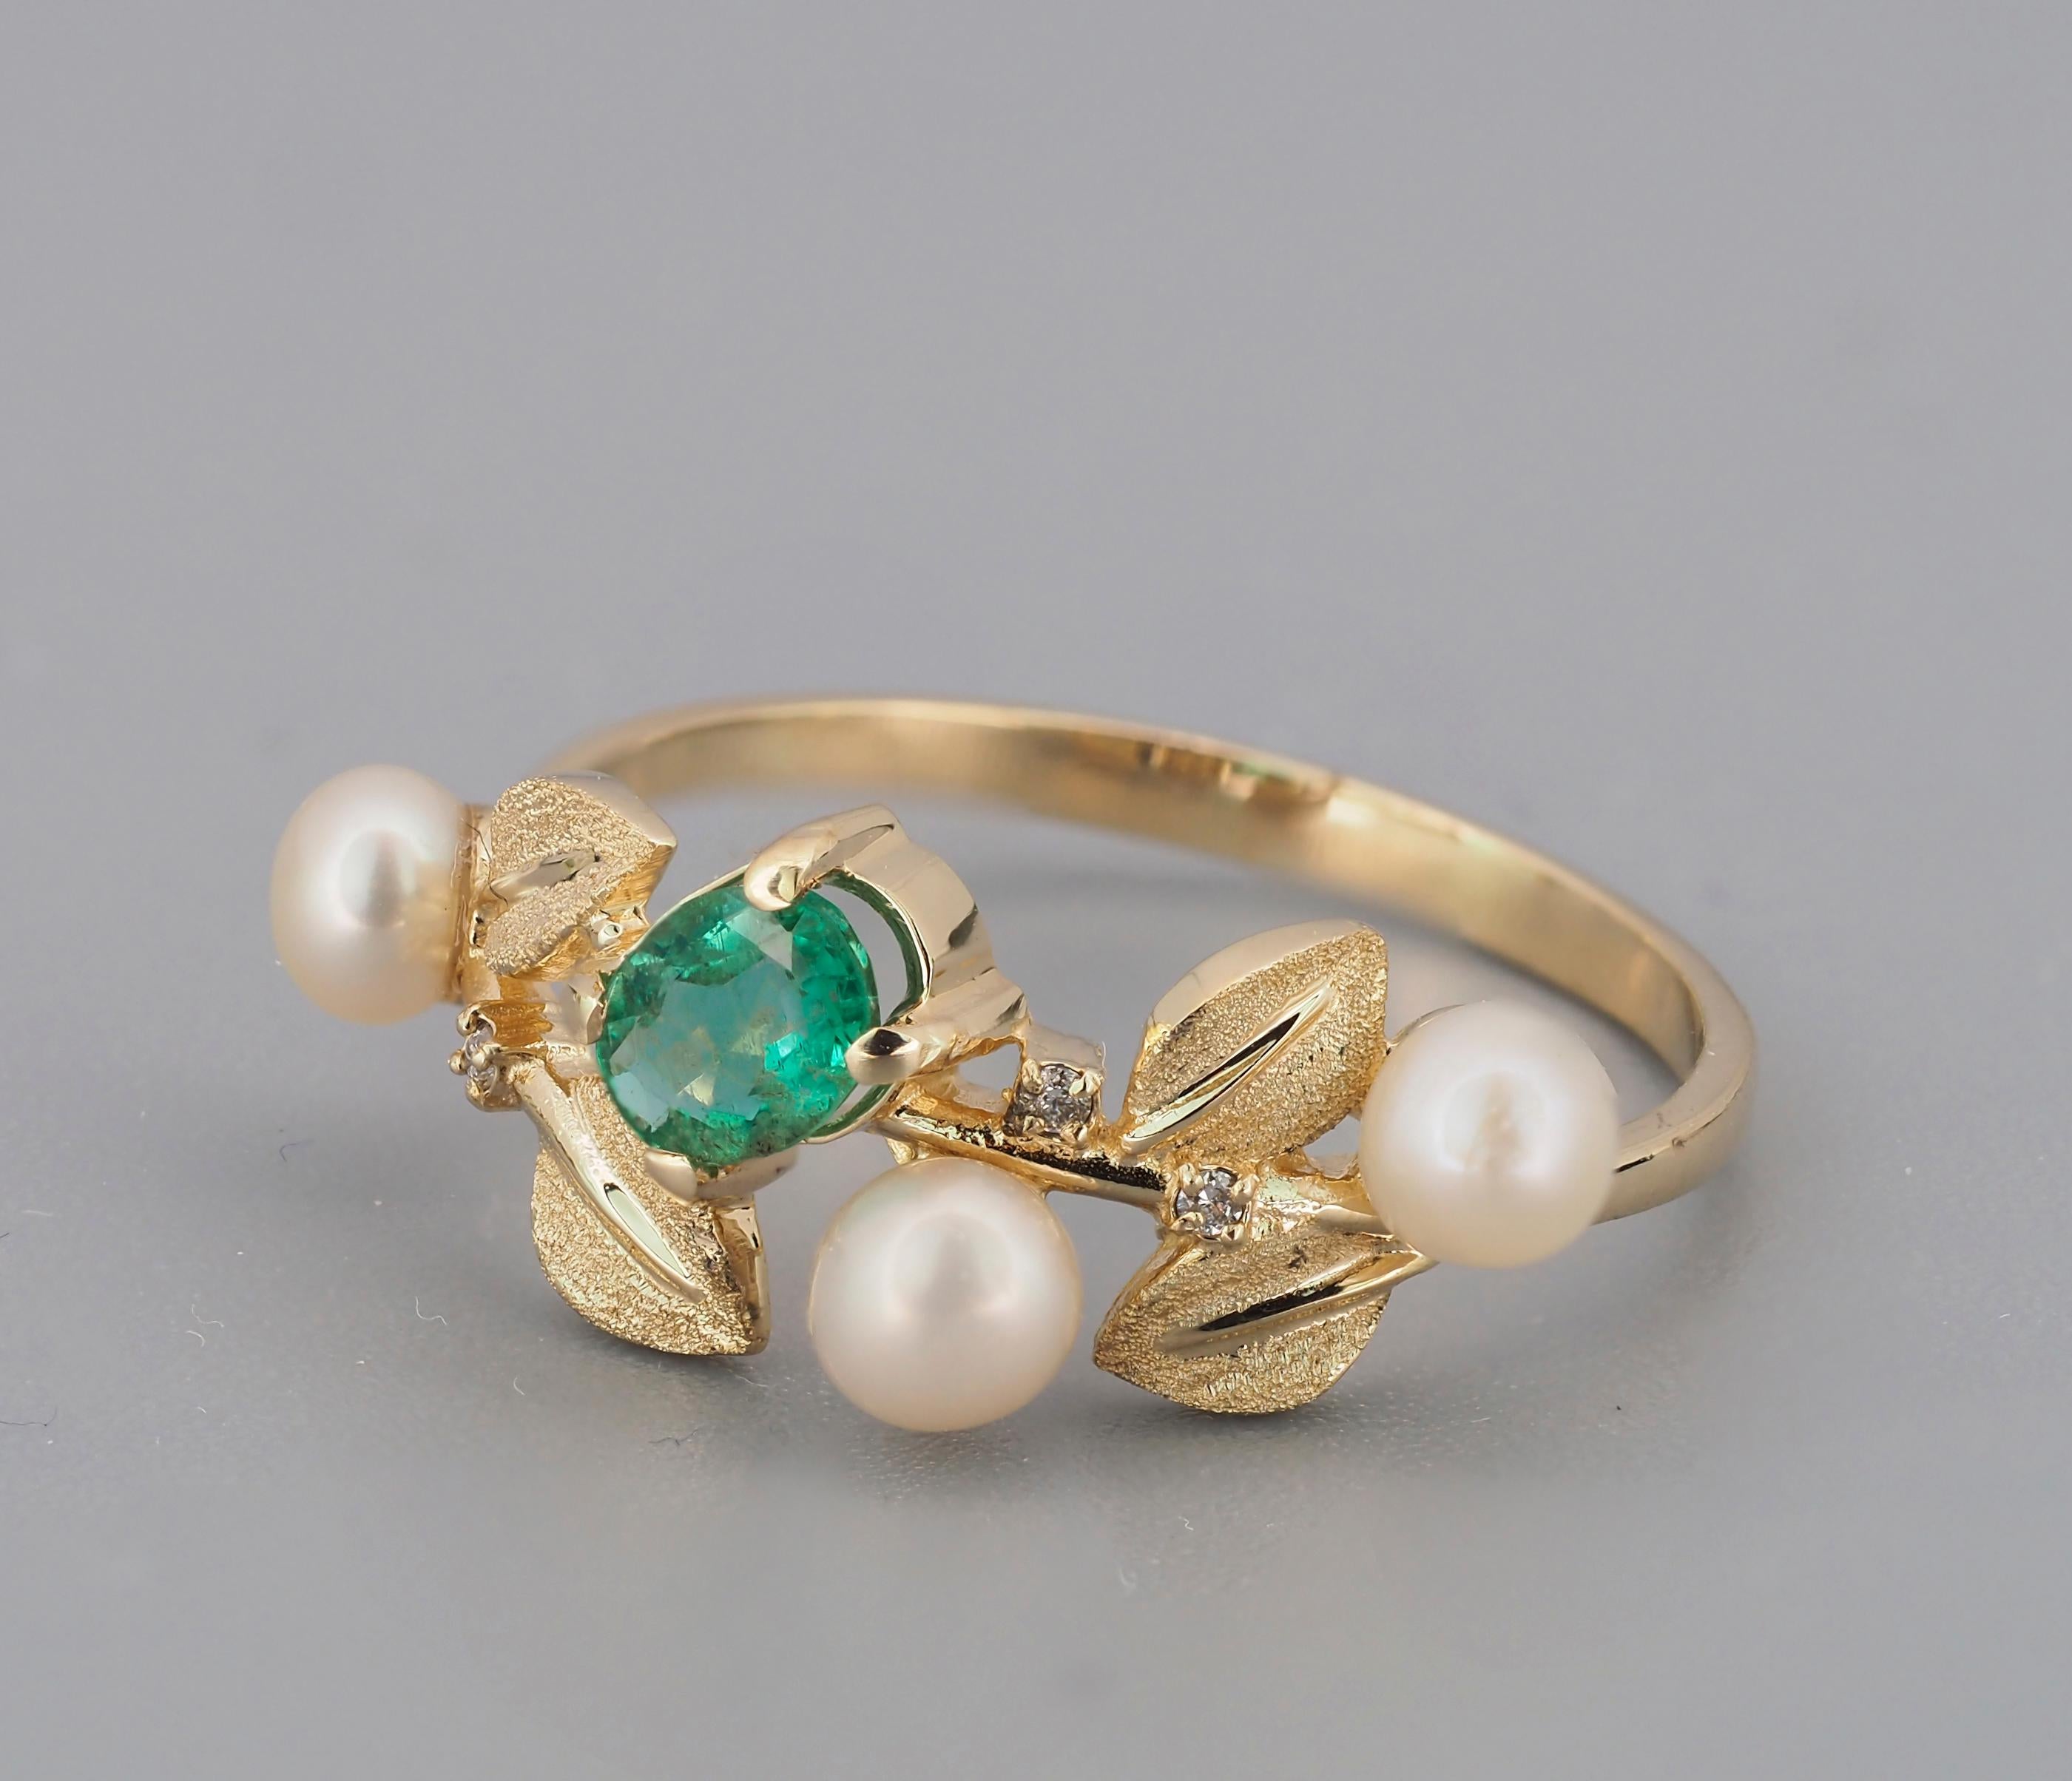 For Sale:  14k Gold Ring with Emerald, Pearls and Diamonds 4